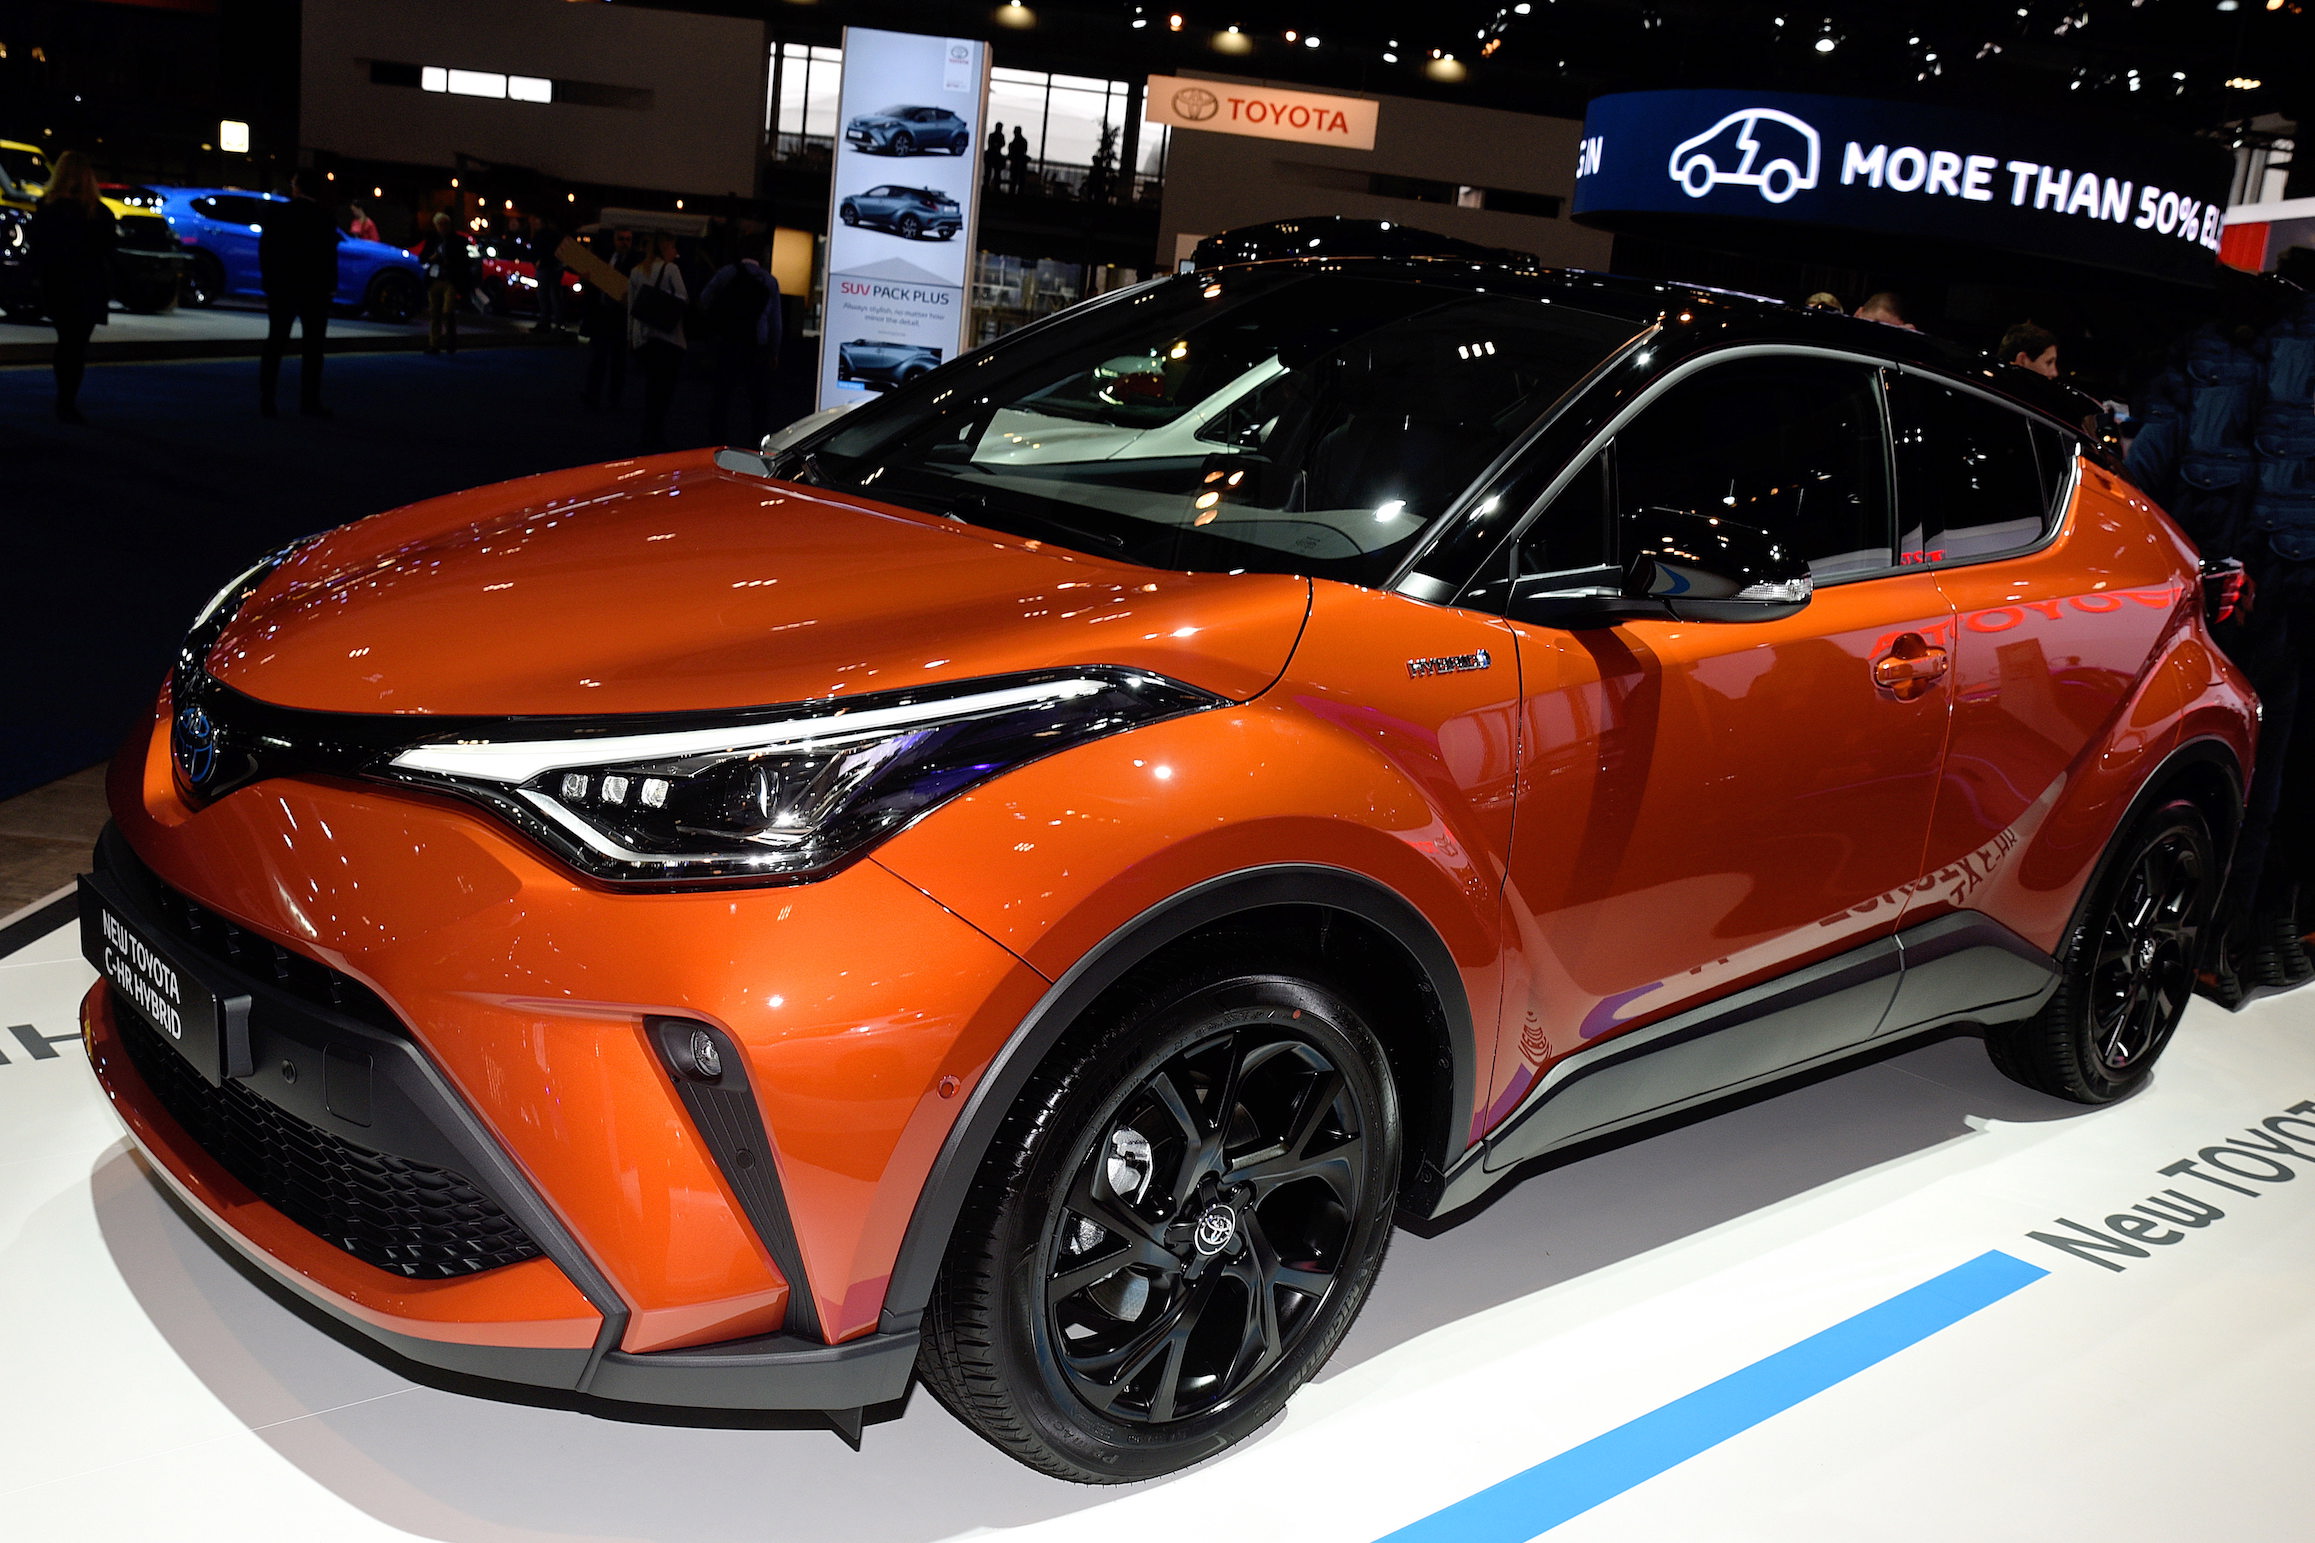 The Toyota C-HR Hybrid on display at the Brussels Motor Show